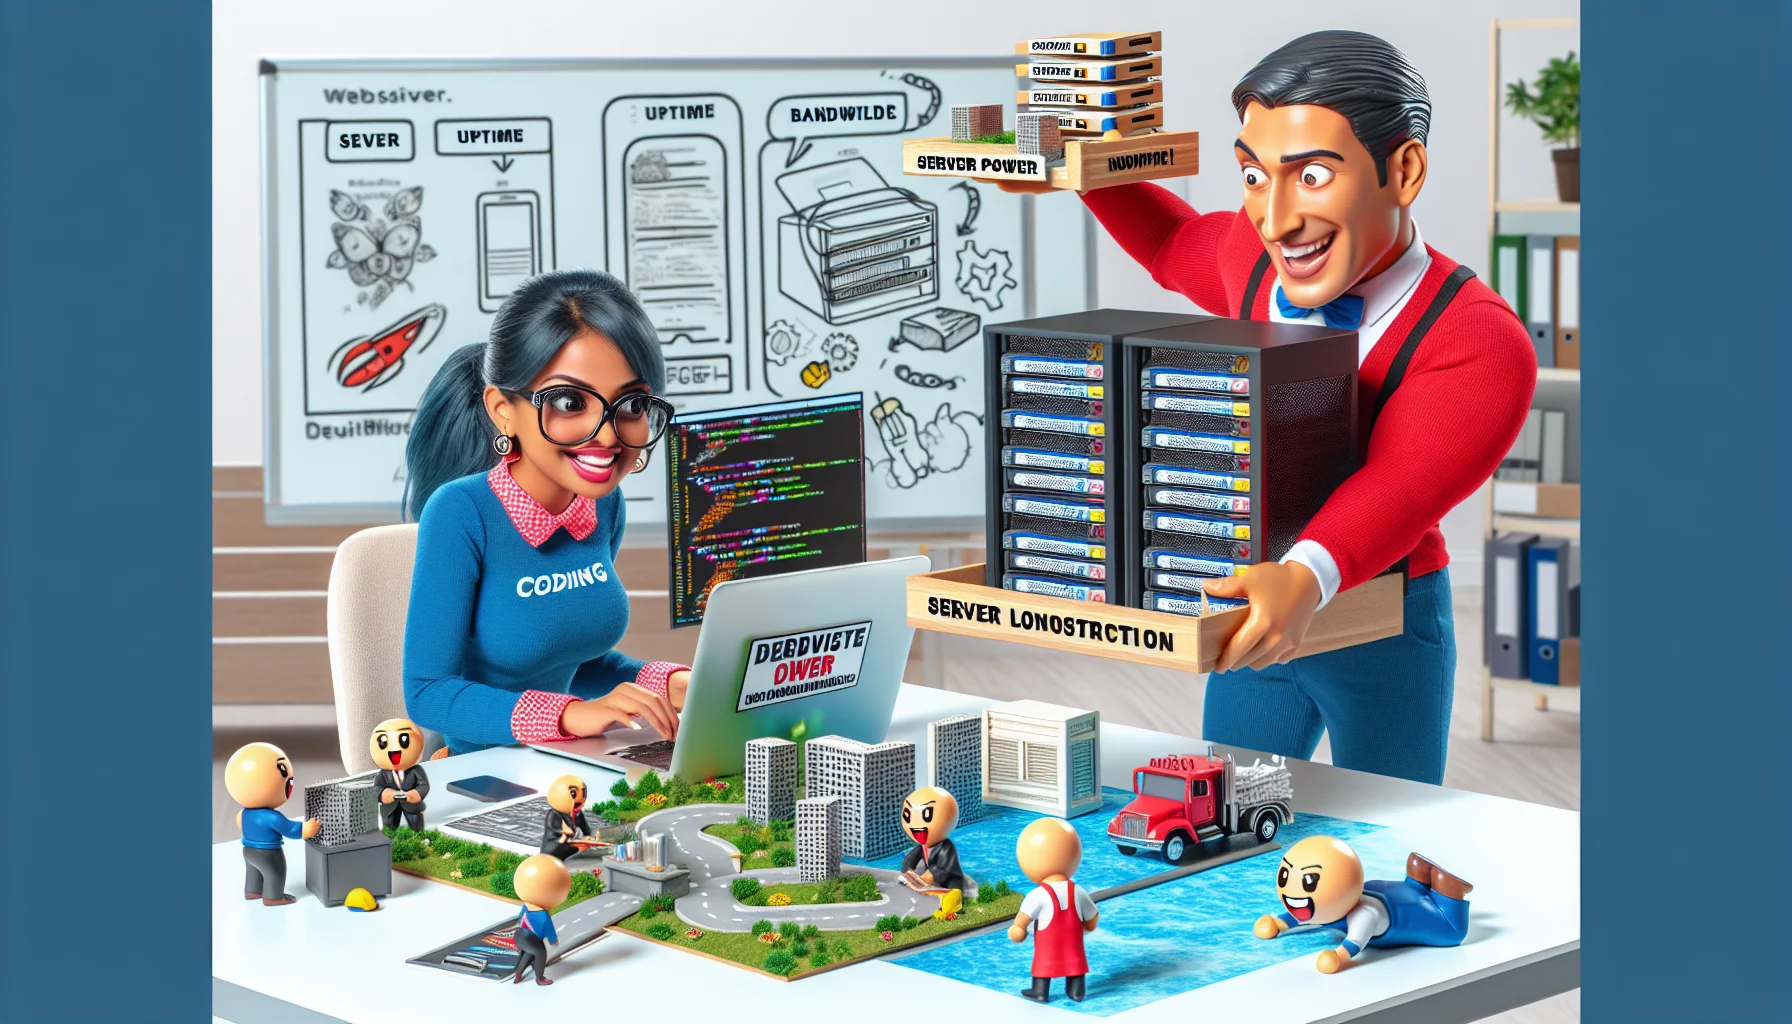 Create an image featuring an amusing scenario that promotes web hosting services for nonprofit organizations. Depict a South Asian female web developer with a bubbly personality, enthusiastically coding on her laptop, while a humorous Hispanic male server character hovers with a tray of 3D models representing 'server power', 'uptime', and 'bandwidth'. They are in a bright office with tech-inspired decorations and a large whiteboard which has sketches of website designs for nonprofits. Sprinkle the scene with visual puns and clever details related to website building, like small construction tools working on a miniature website construction site on the office desk.